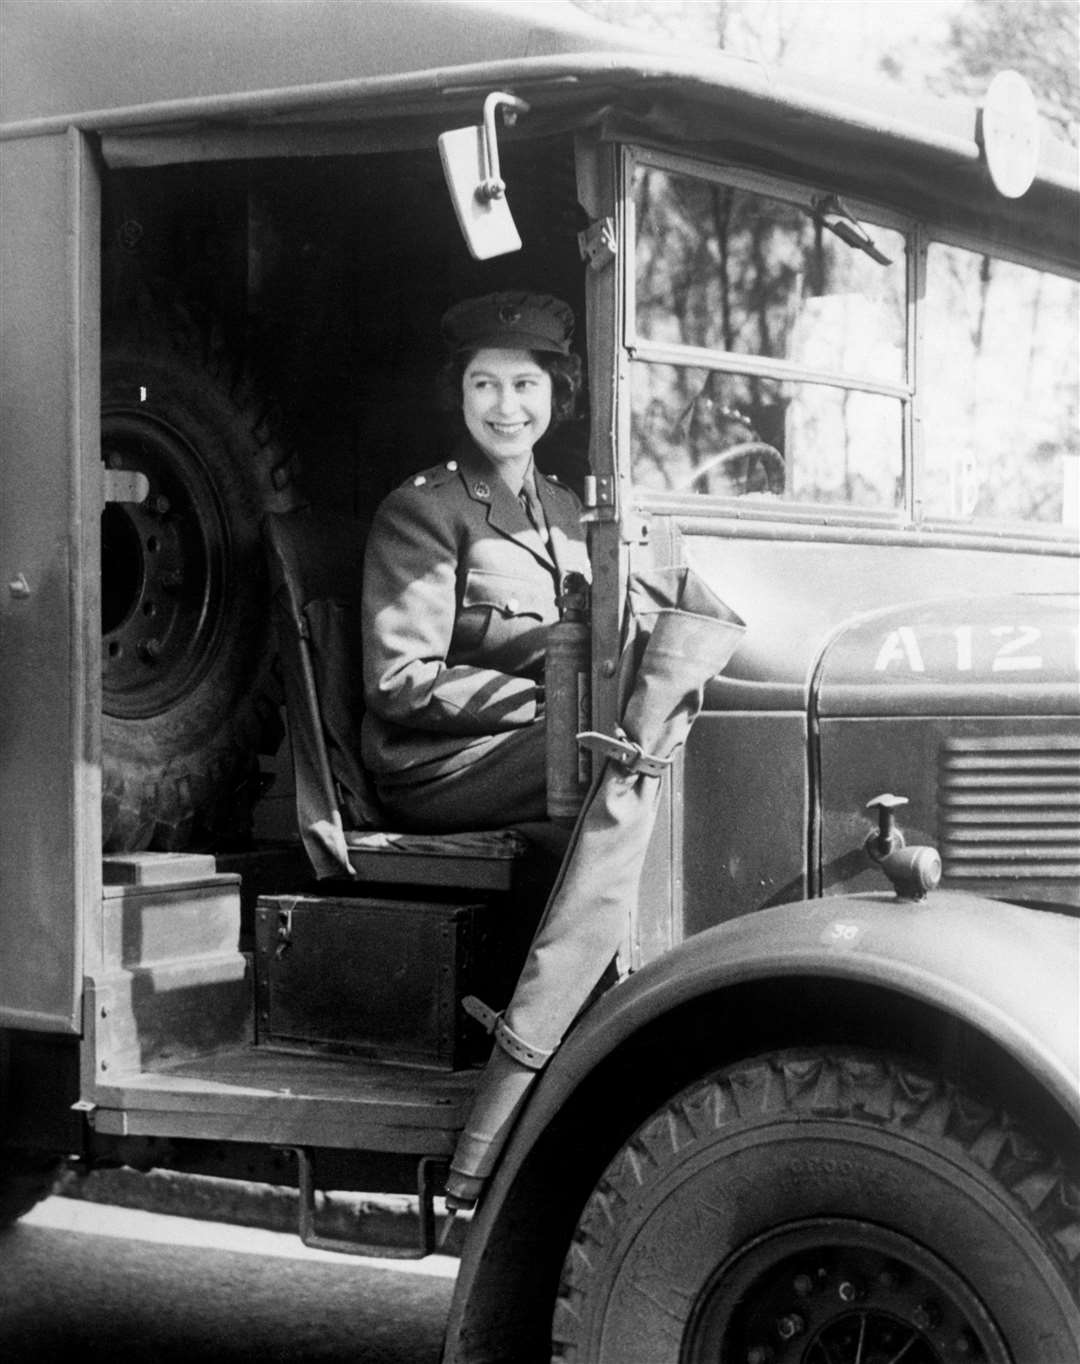 Princess Elizabeth at the wheel of an Army vehicle when she served during the Second World War in the Auxiliary Territorial Service in 1945 (PA)